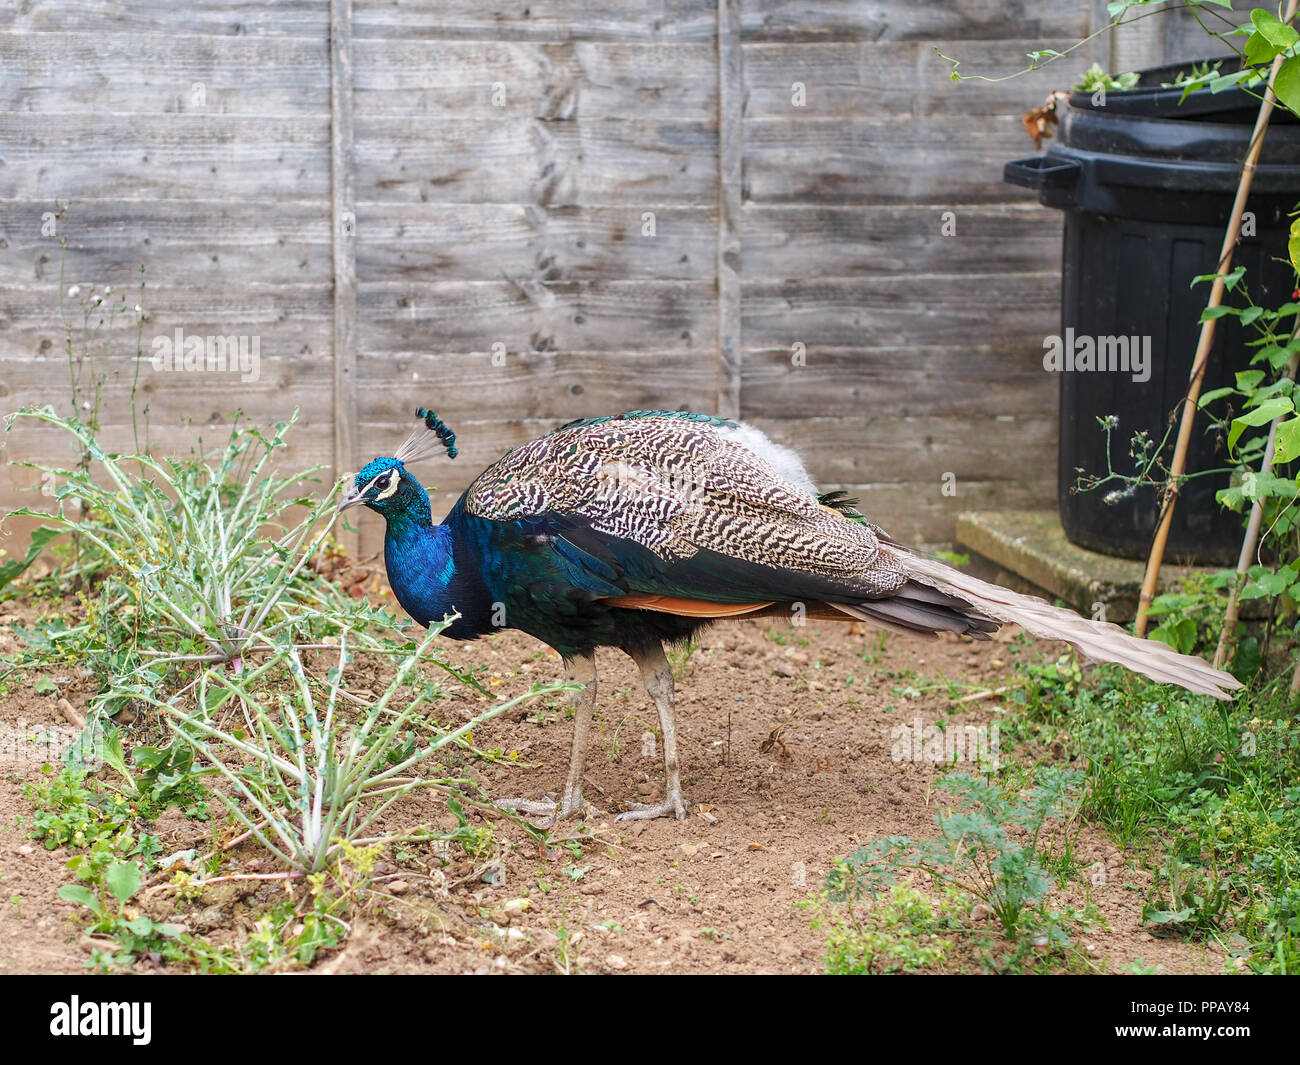 Young urban peacock decimating vegetable crop in domestic garden. UK. Beautiful but not very wanted visitor. Stock Photo